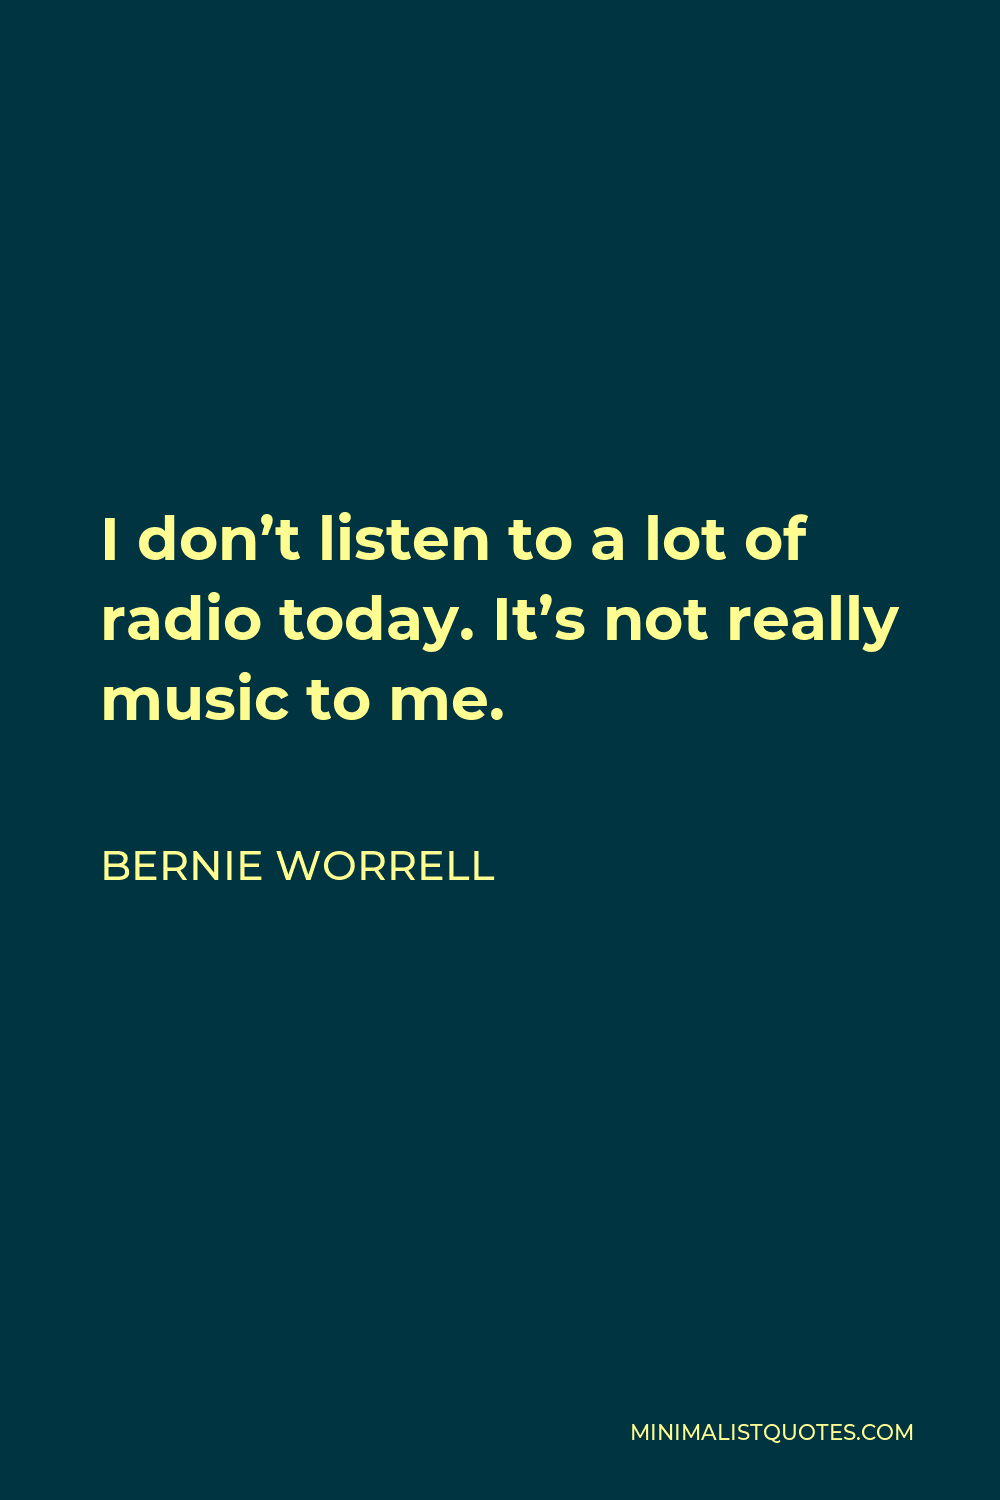 Bernie Worrell Quote - I don’t listen to a lot of radio today. It’s not really music to me.